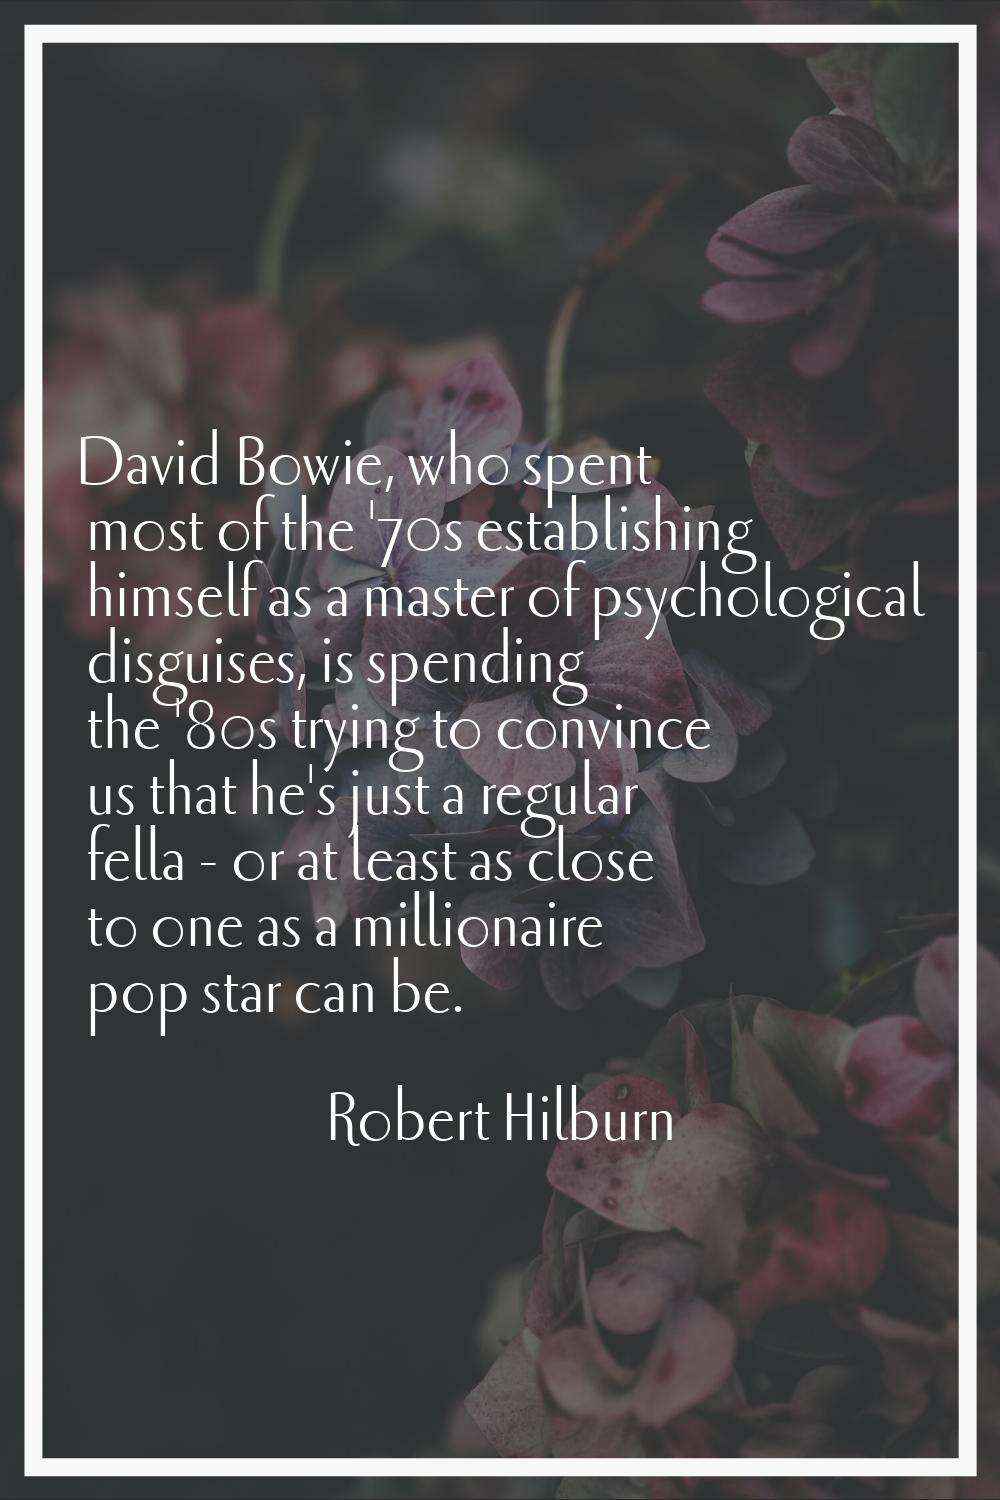 David Bowie, who spent most of the '70s establishing himself as a master of psychological disguises